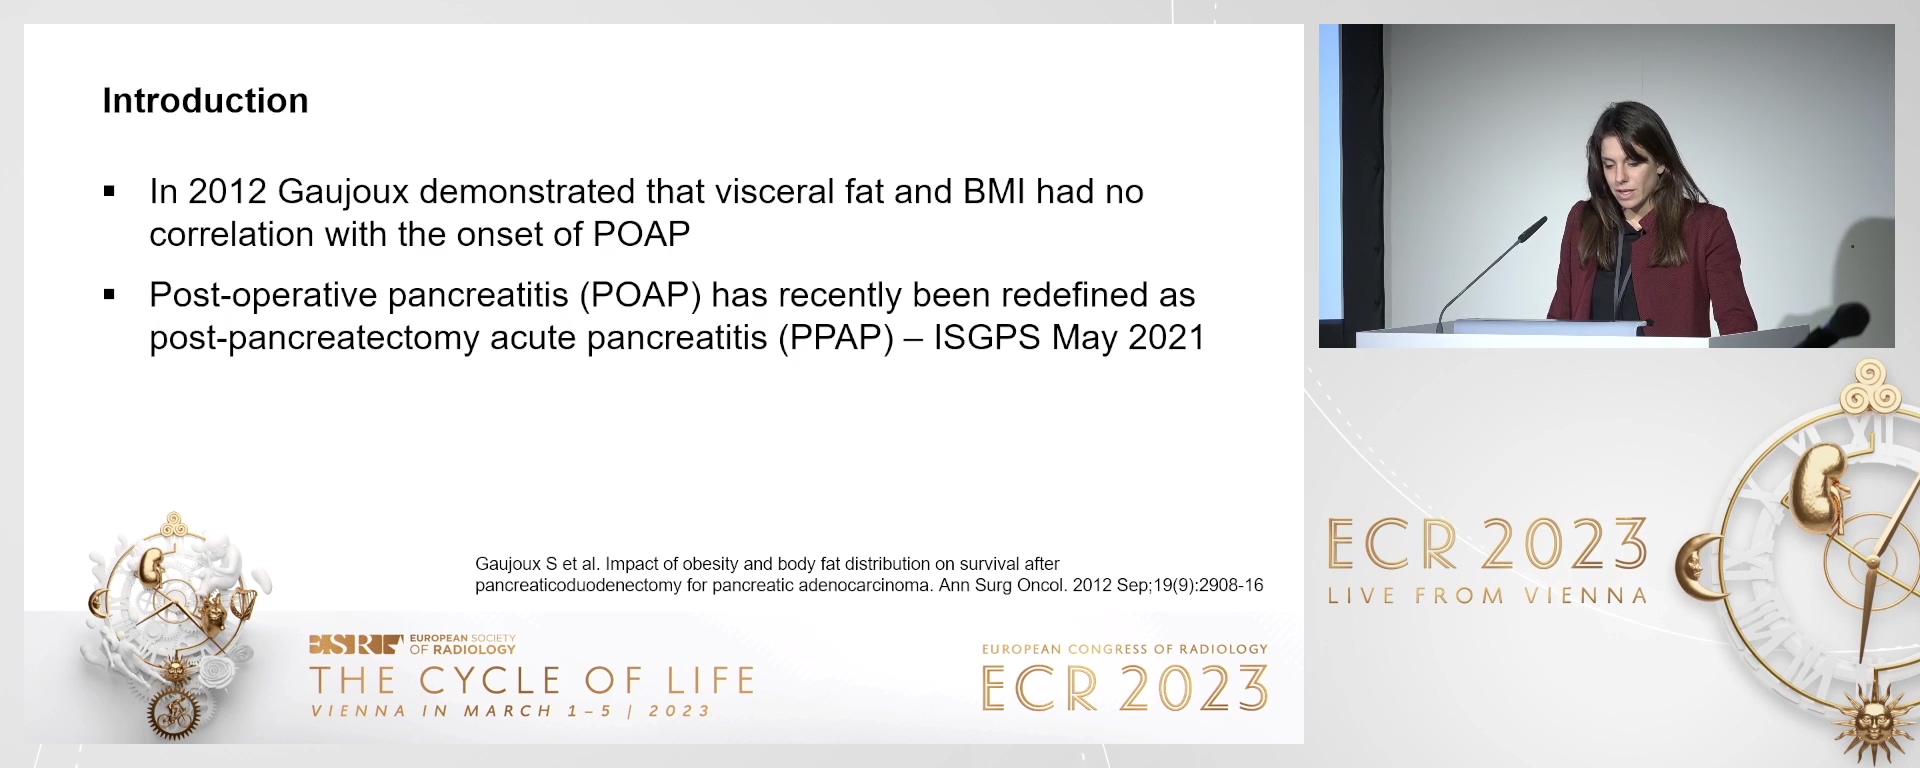 Correlation between visceral fat volume, sarcopenia and post-operative hyperamylasemia in patients who underwent major pancreatectomy